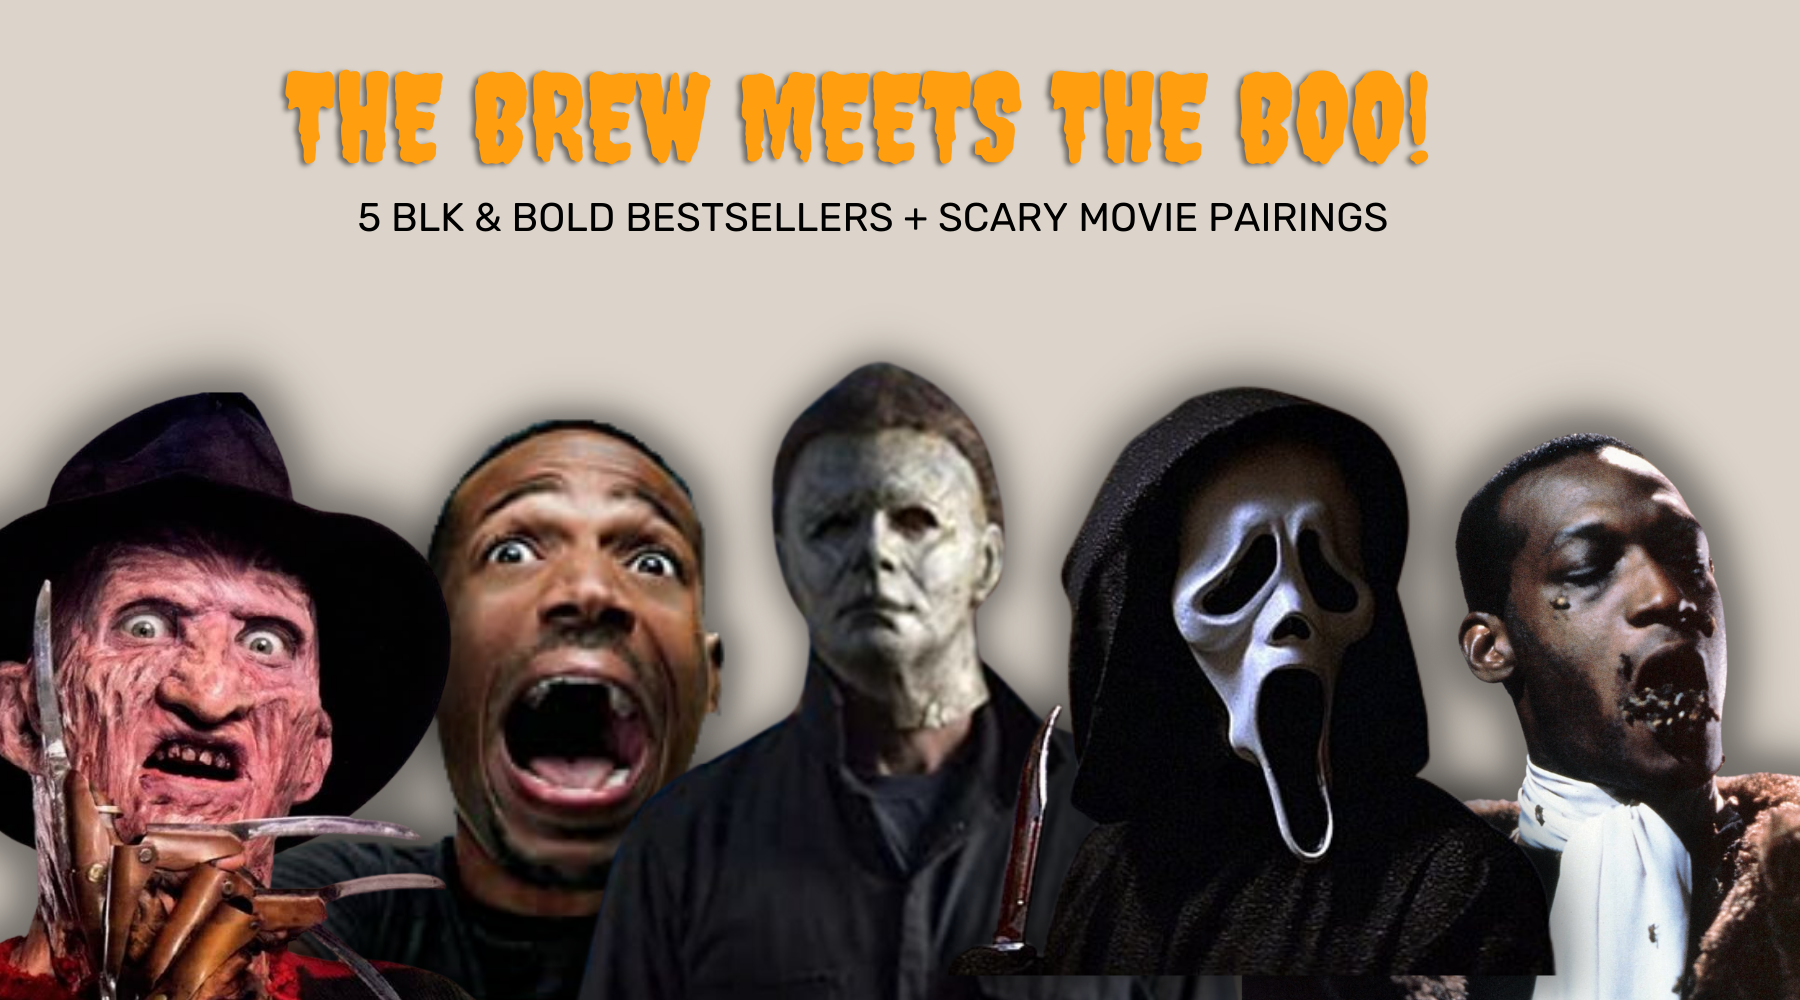 The Brew meets the Boo! 5 BLK & Bold Bestseller + scary movie pairings cover image with a tan background and images of freddy kreuger, marlon wayans, michael myers (the fictional character), ghostface, and the original candyman